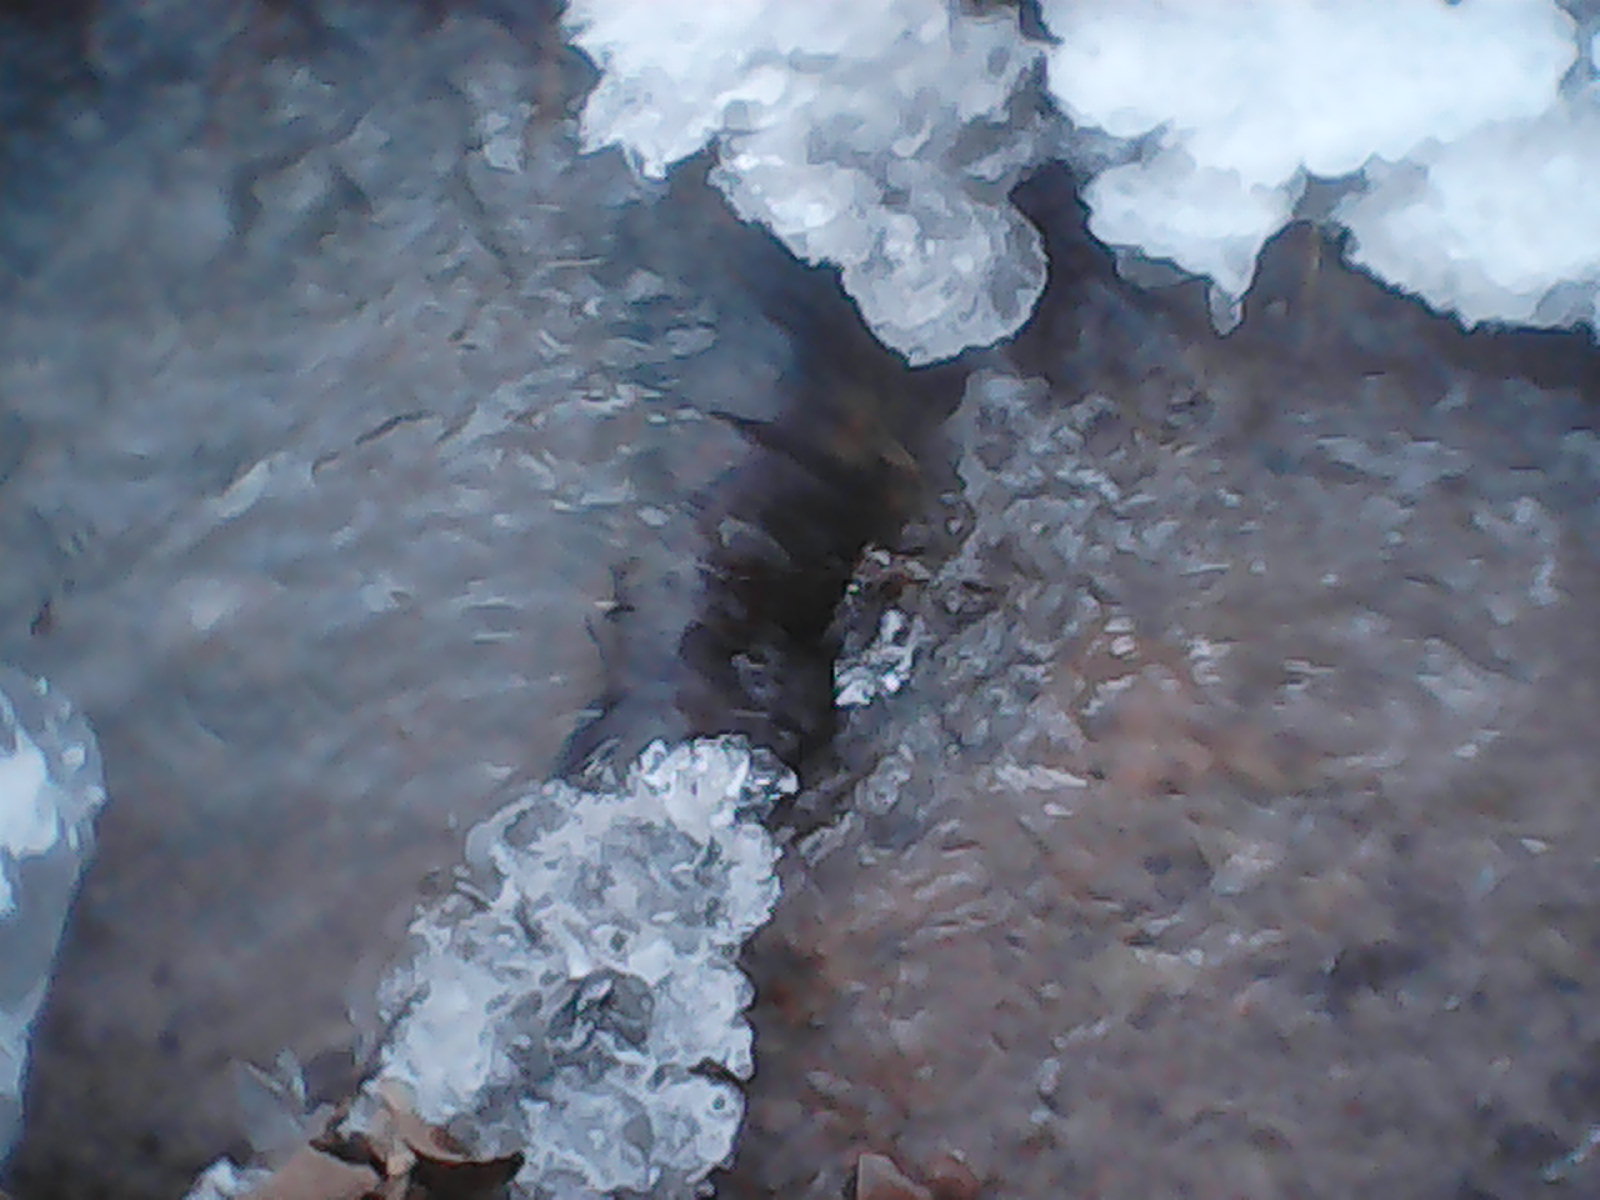 A icy crack in the ground